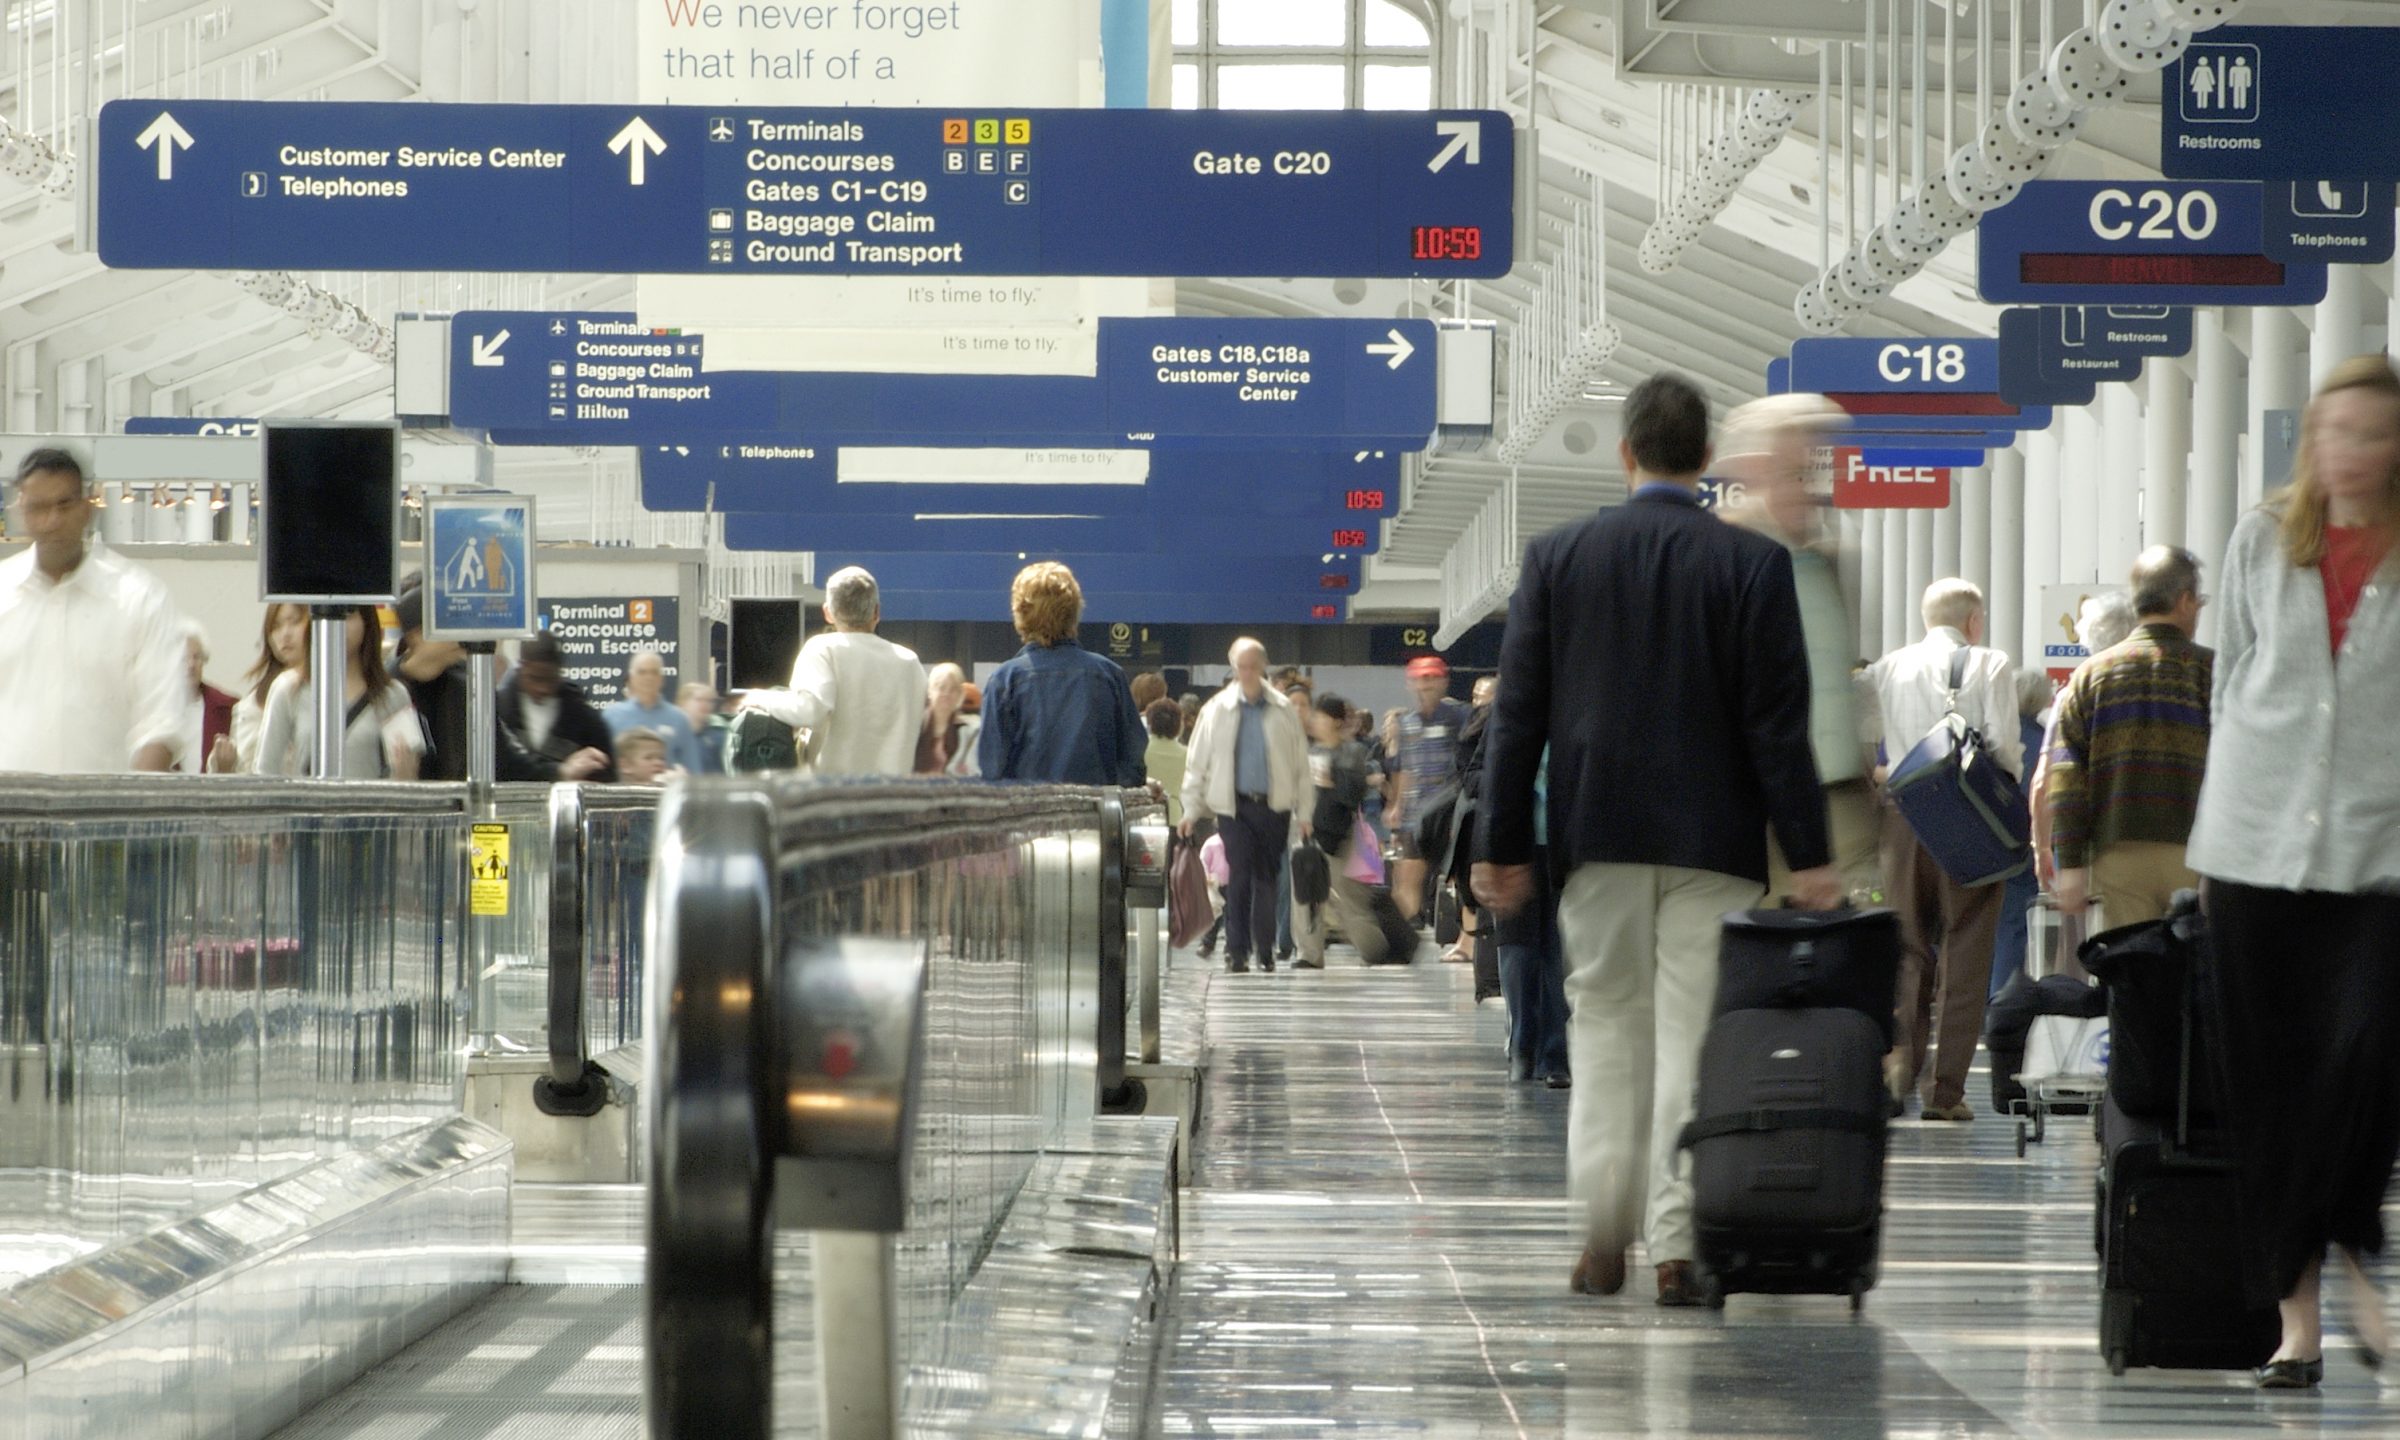 The Best Travel Apps for Navigating the Airport